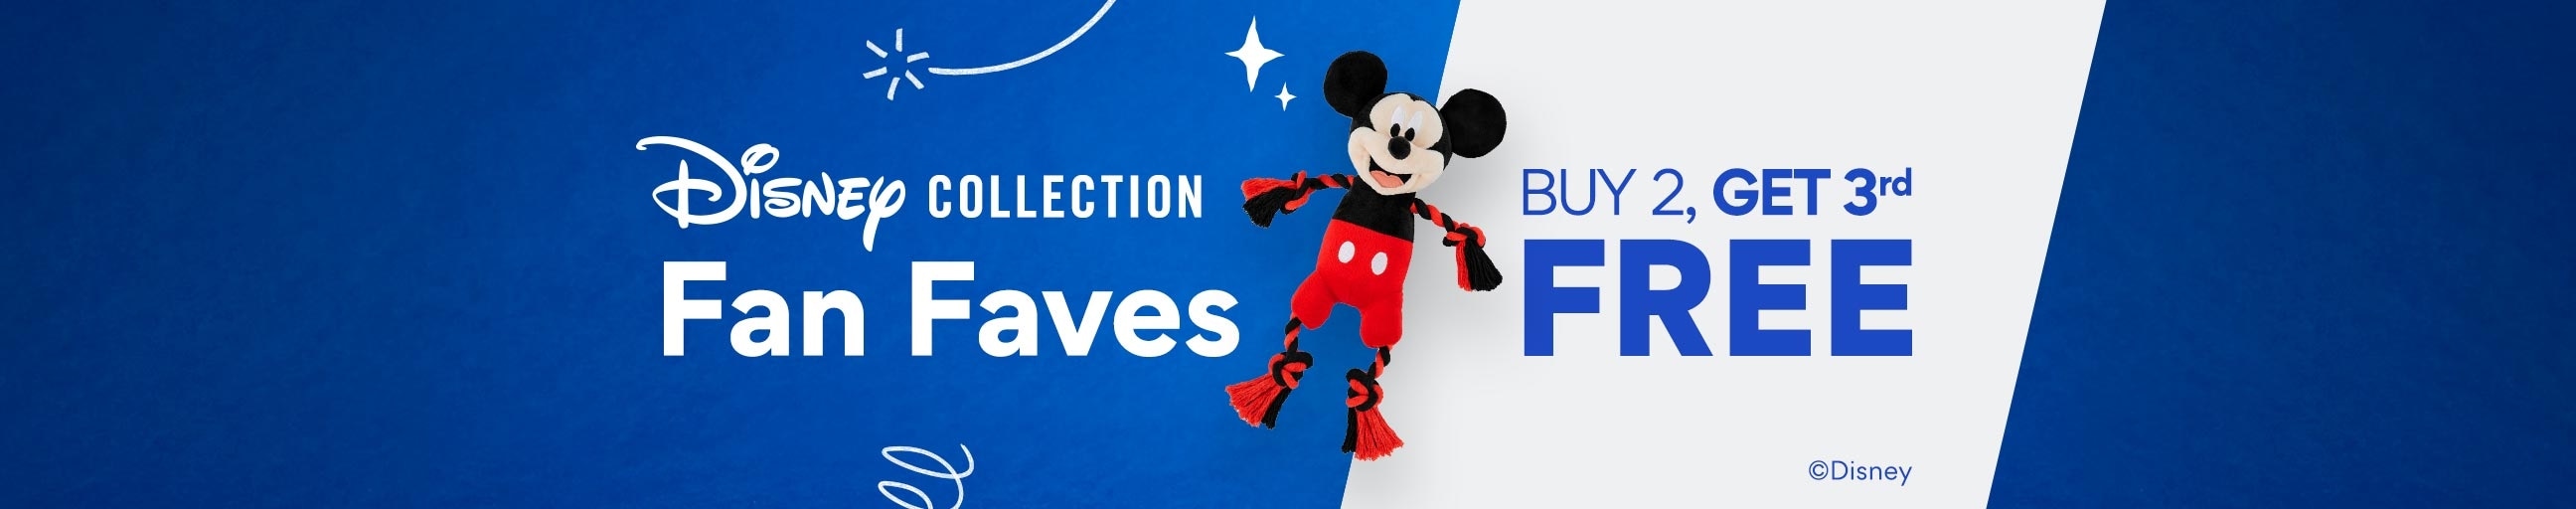 Disney Collection. Fan Faves. Buy 2, Get 3rd Free. Shop Now.